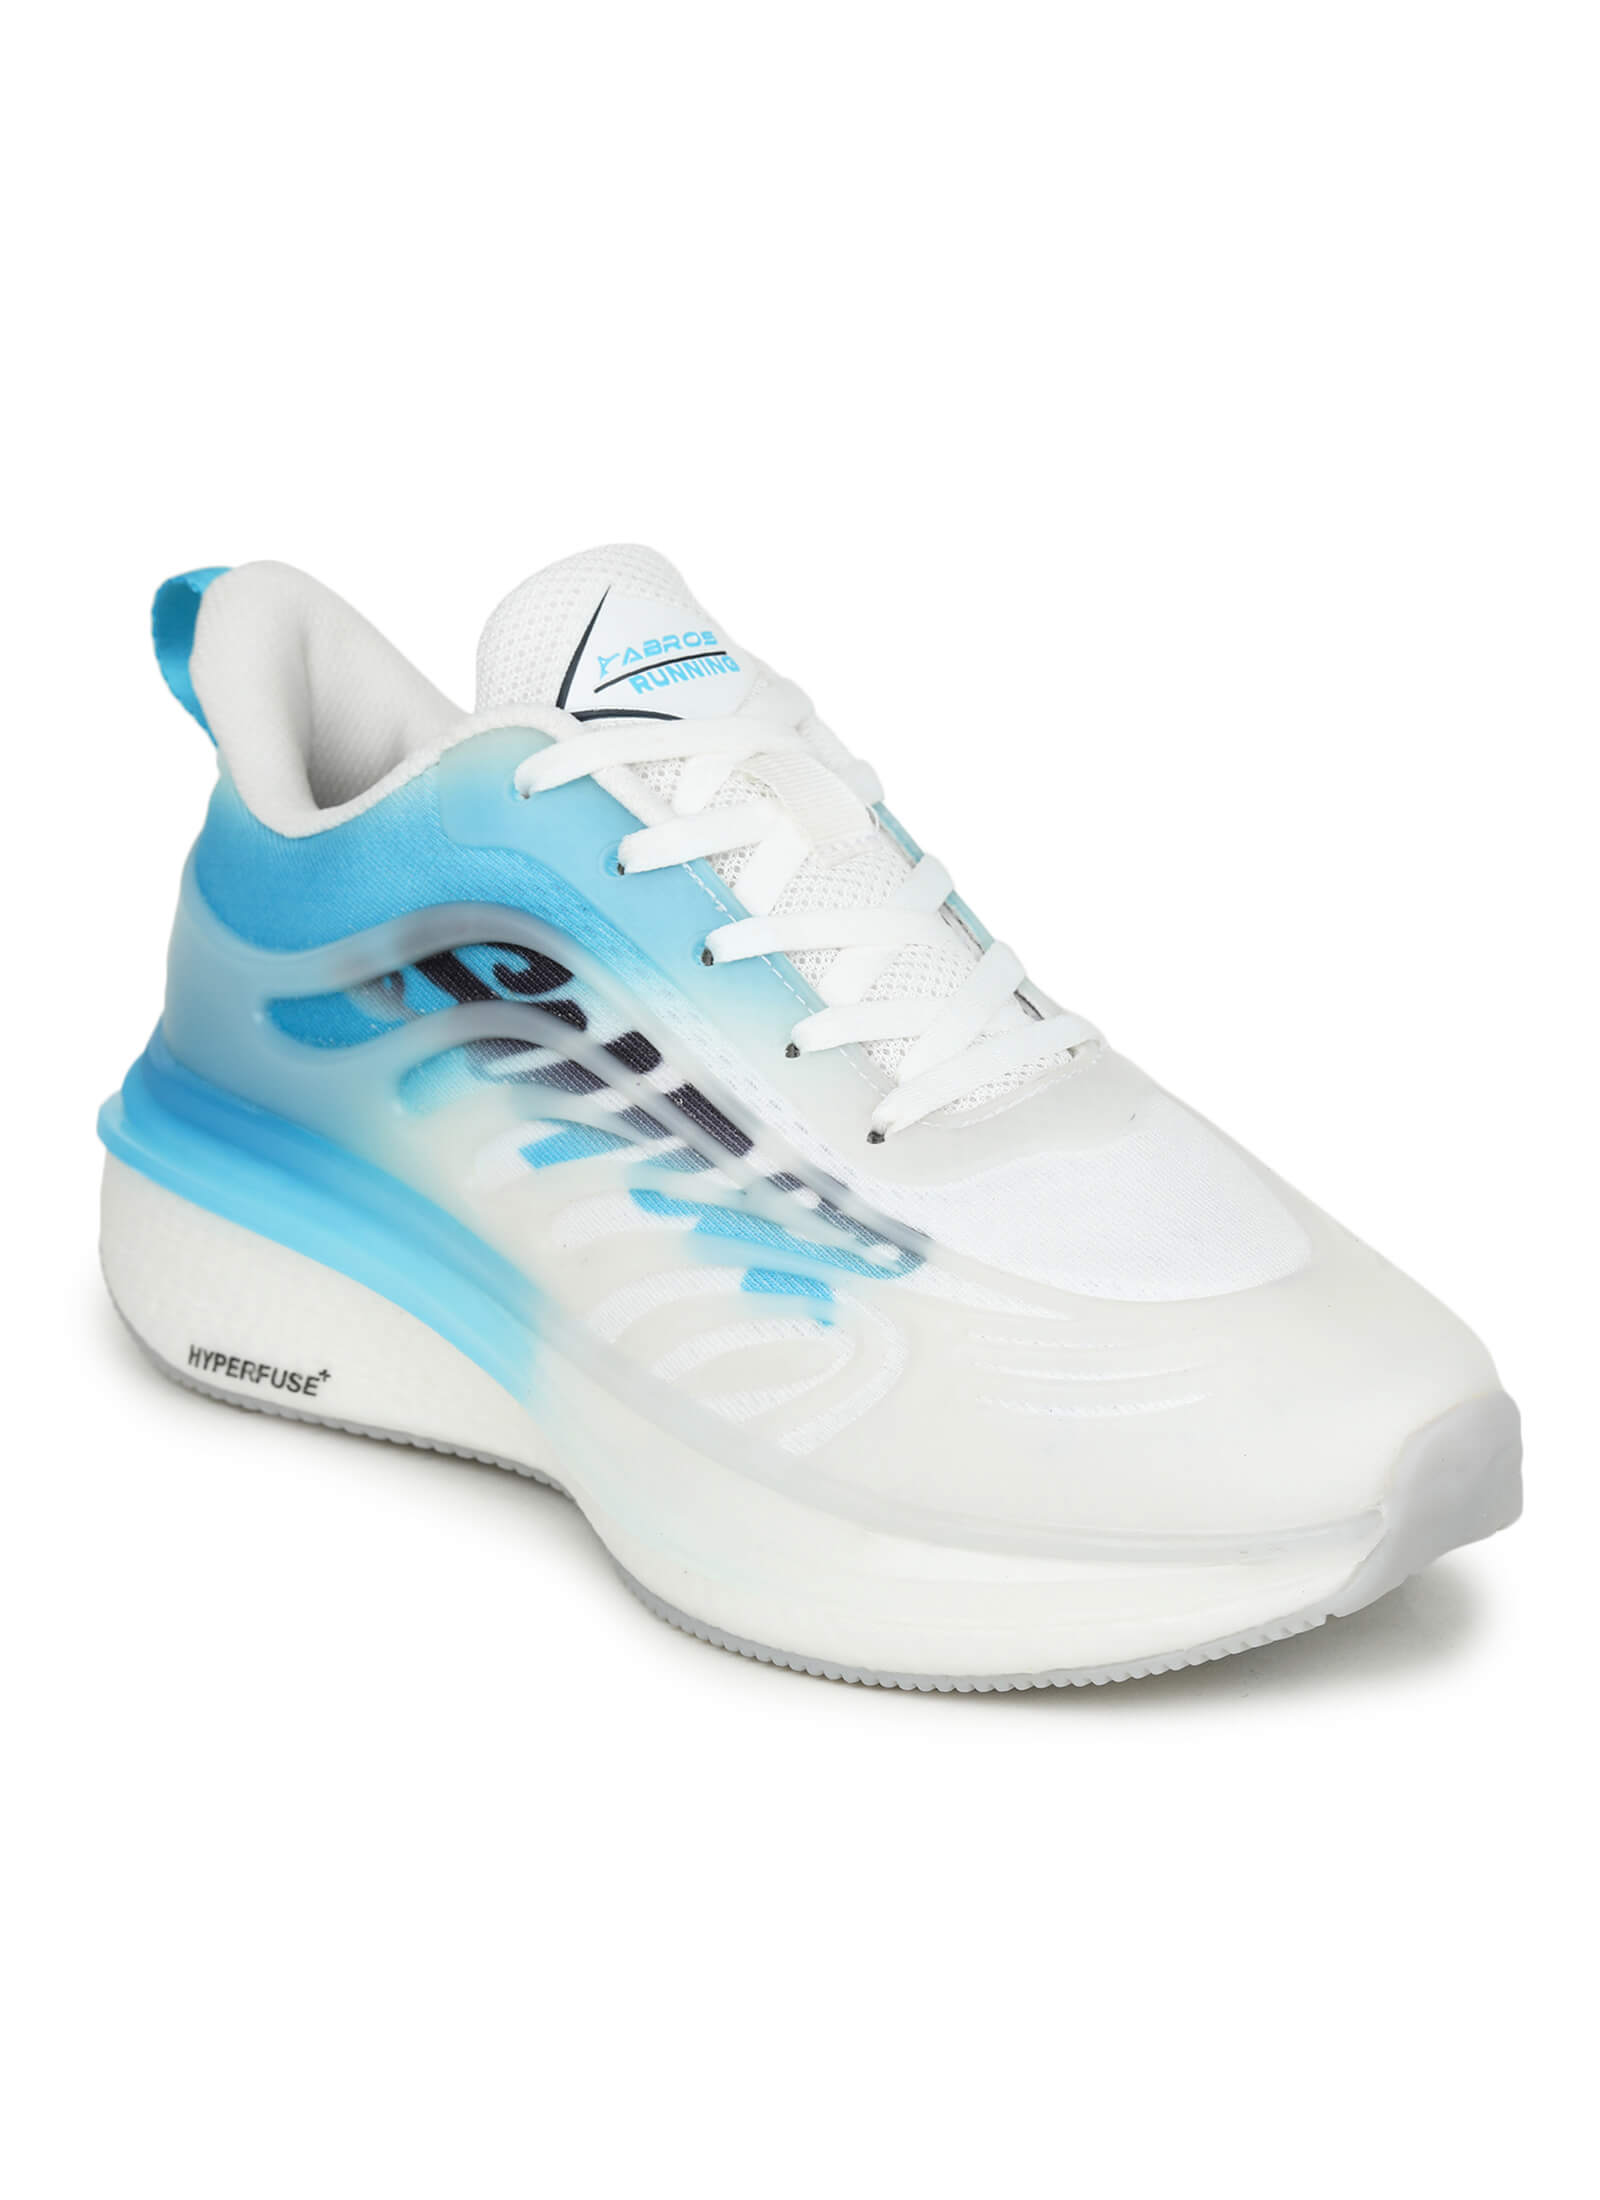 Wagon Hyper Fuse Sports Shoes For Men